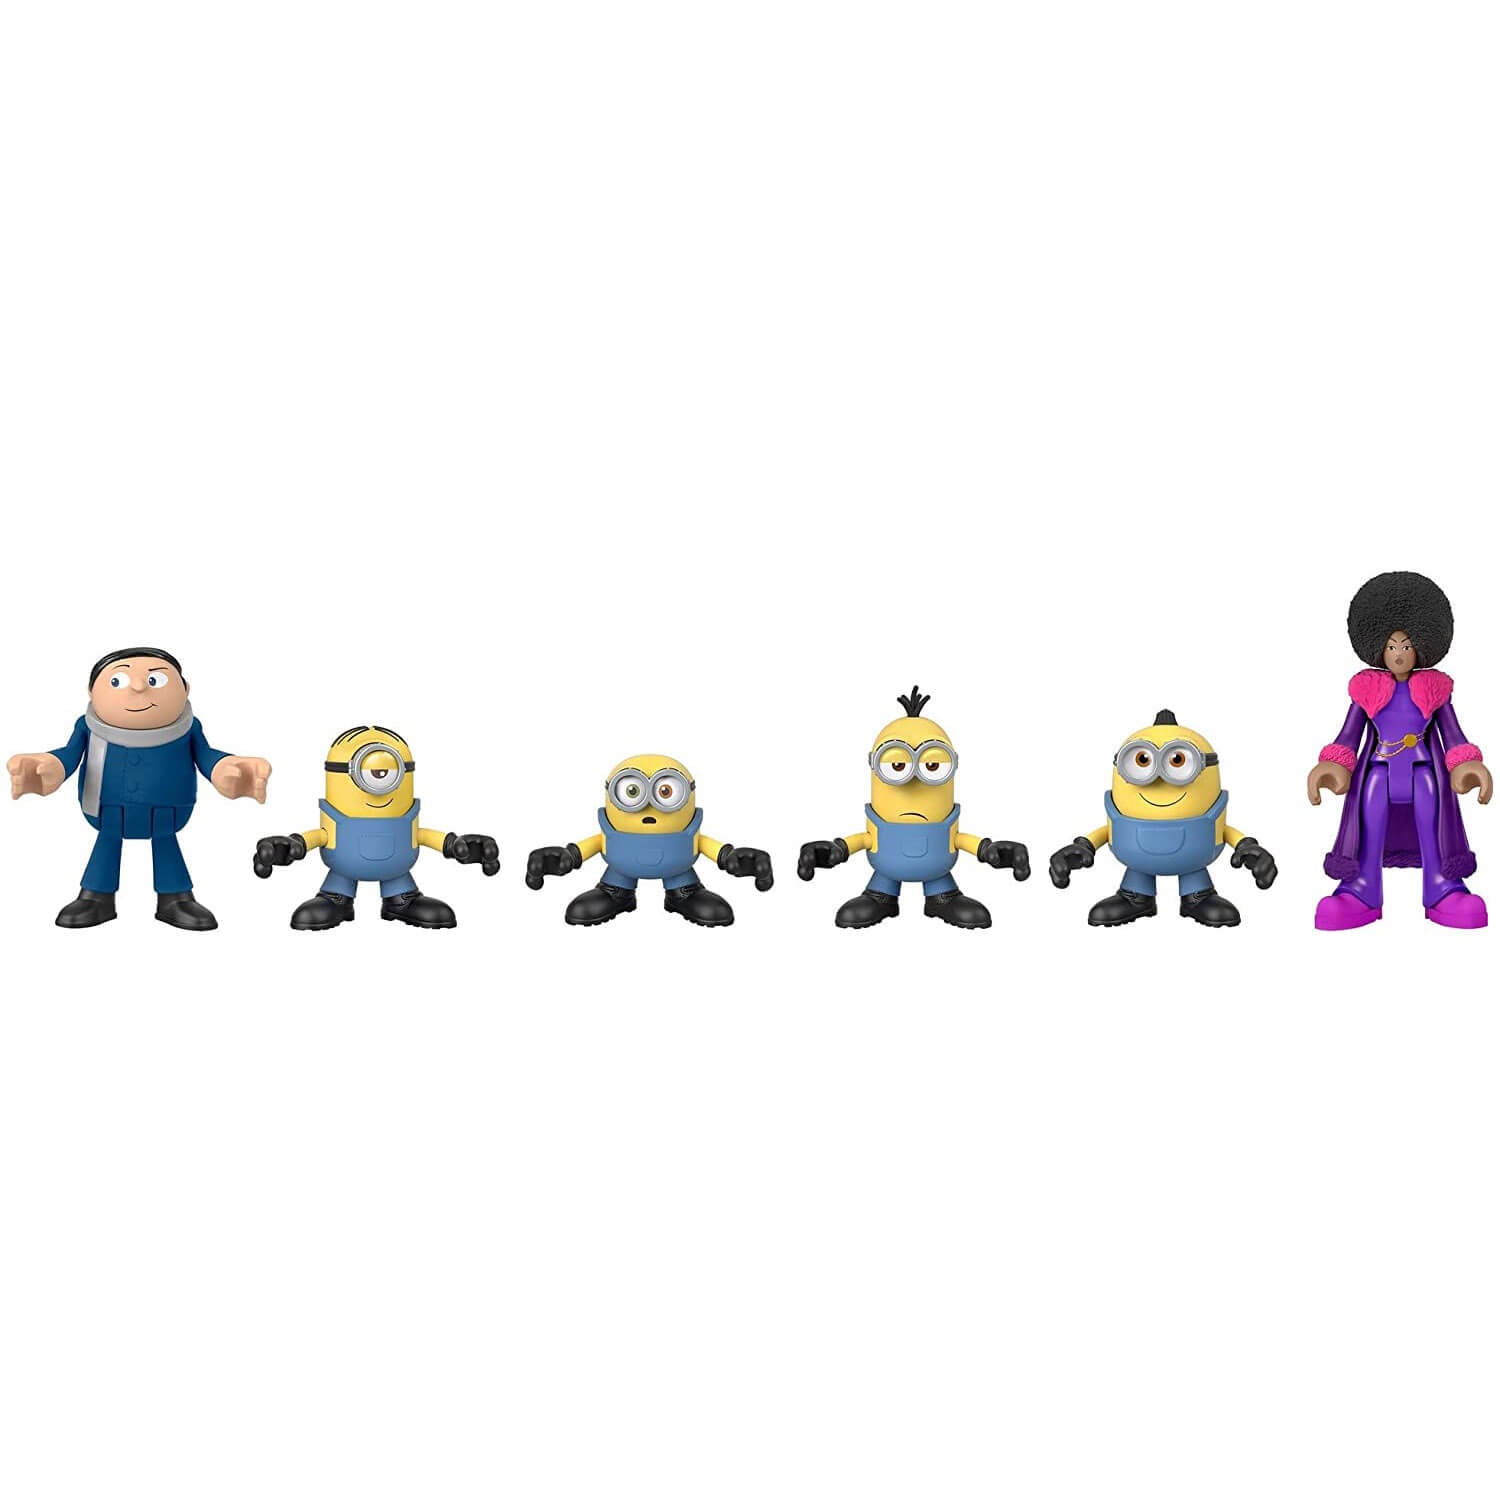 Imaginext Minions The Rise of Gru 6-Pack